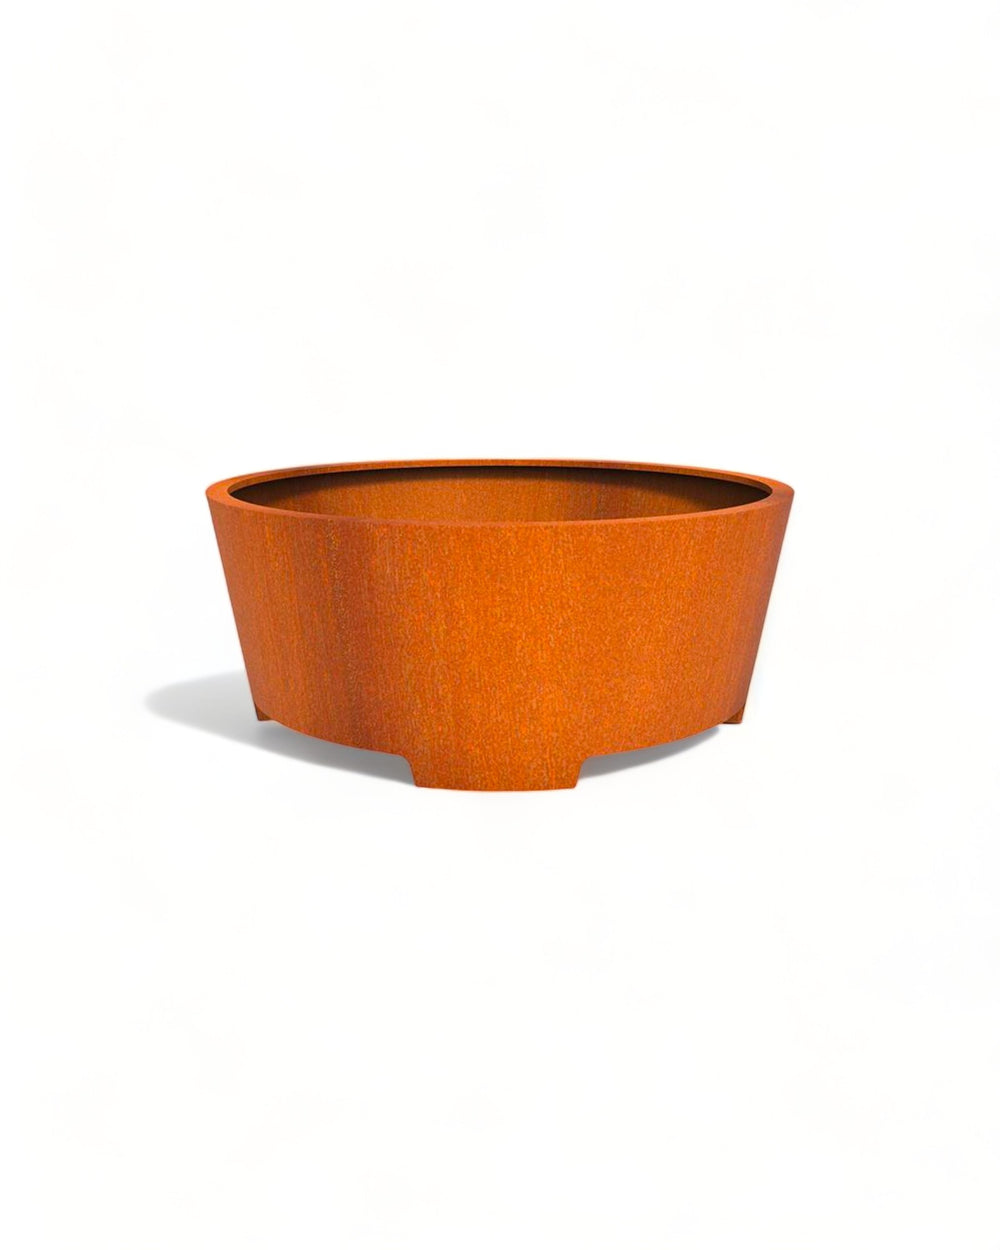 Corten Circular Tapered Planter with Feet